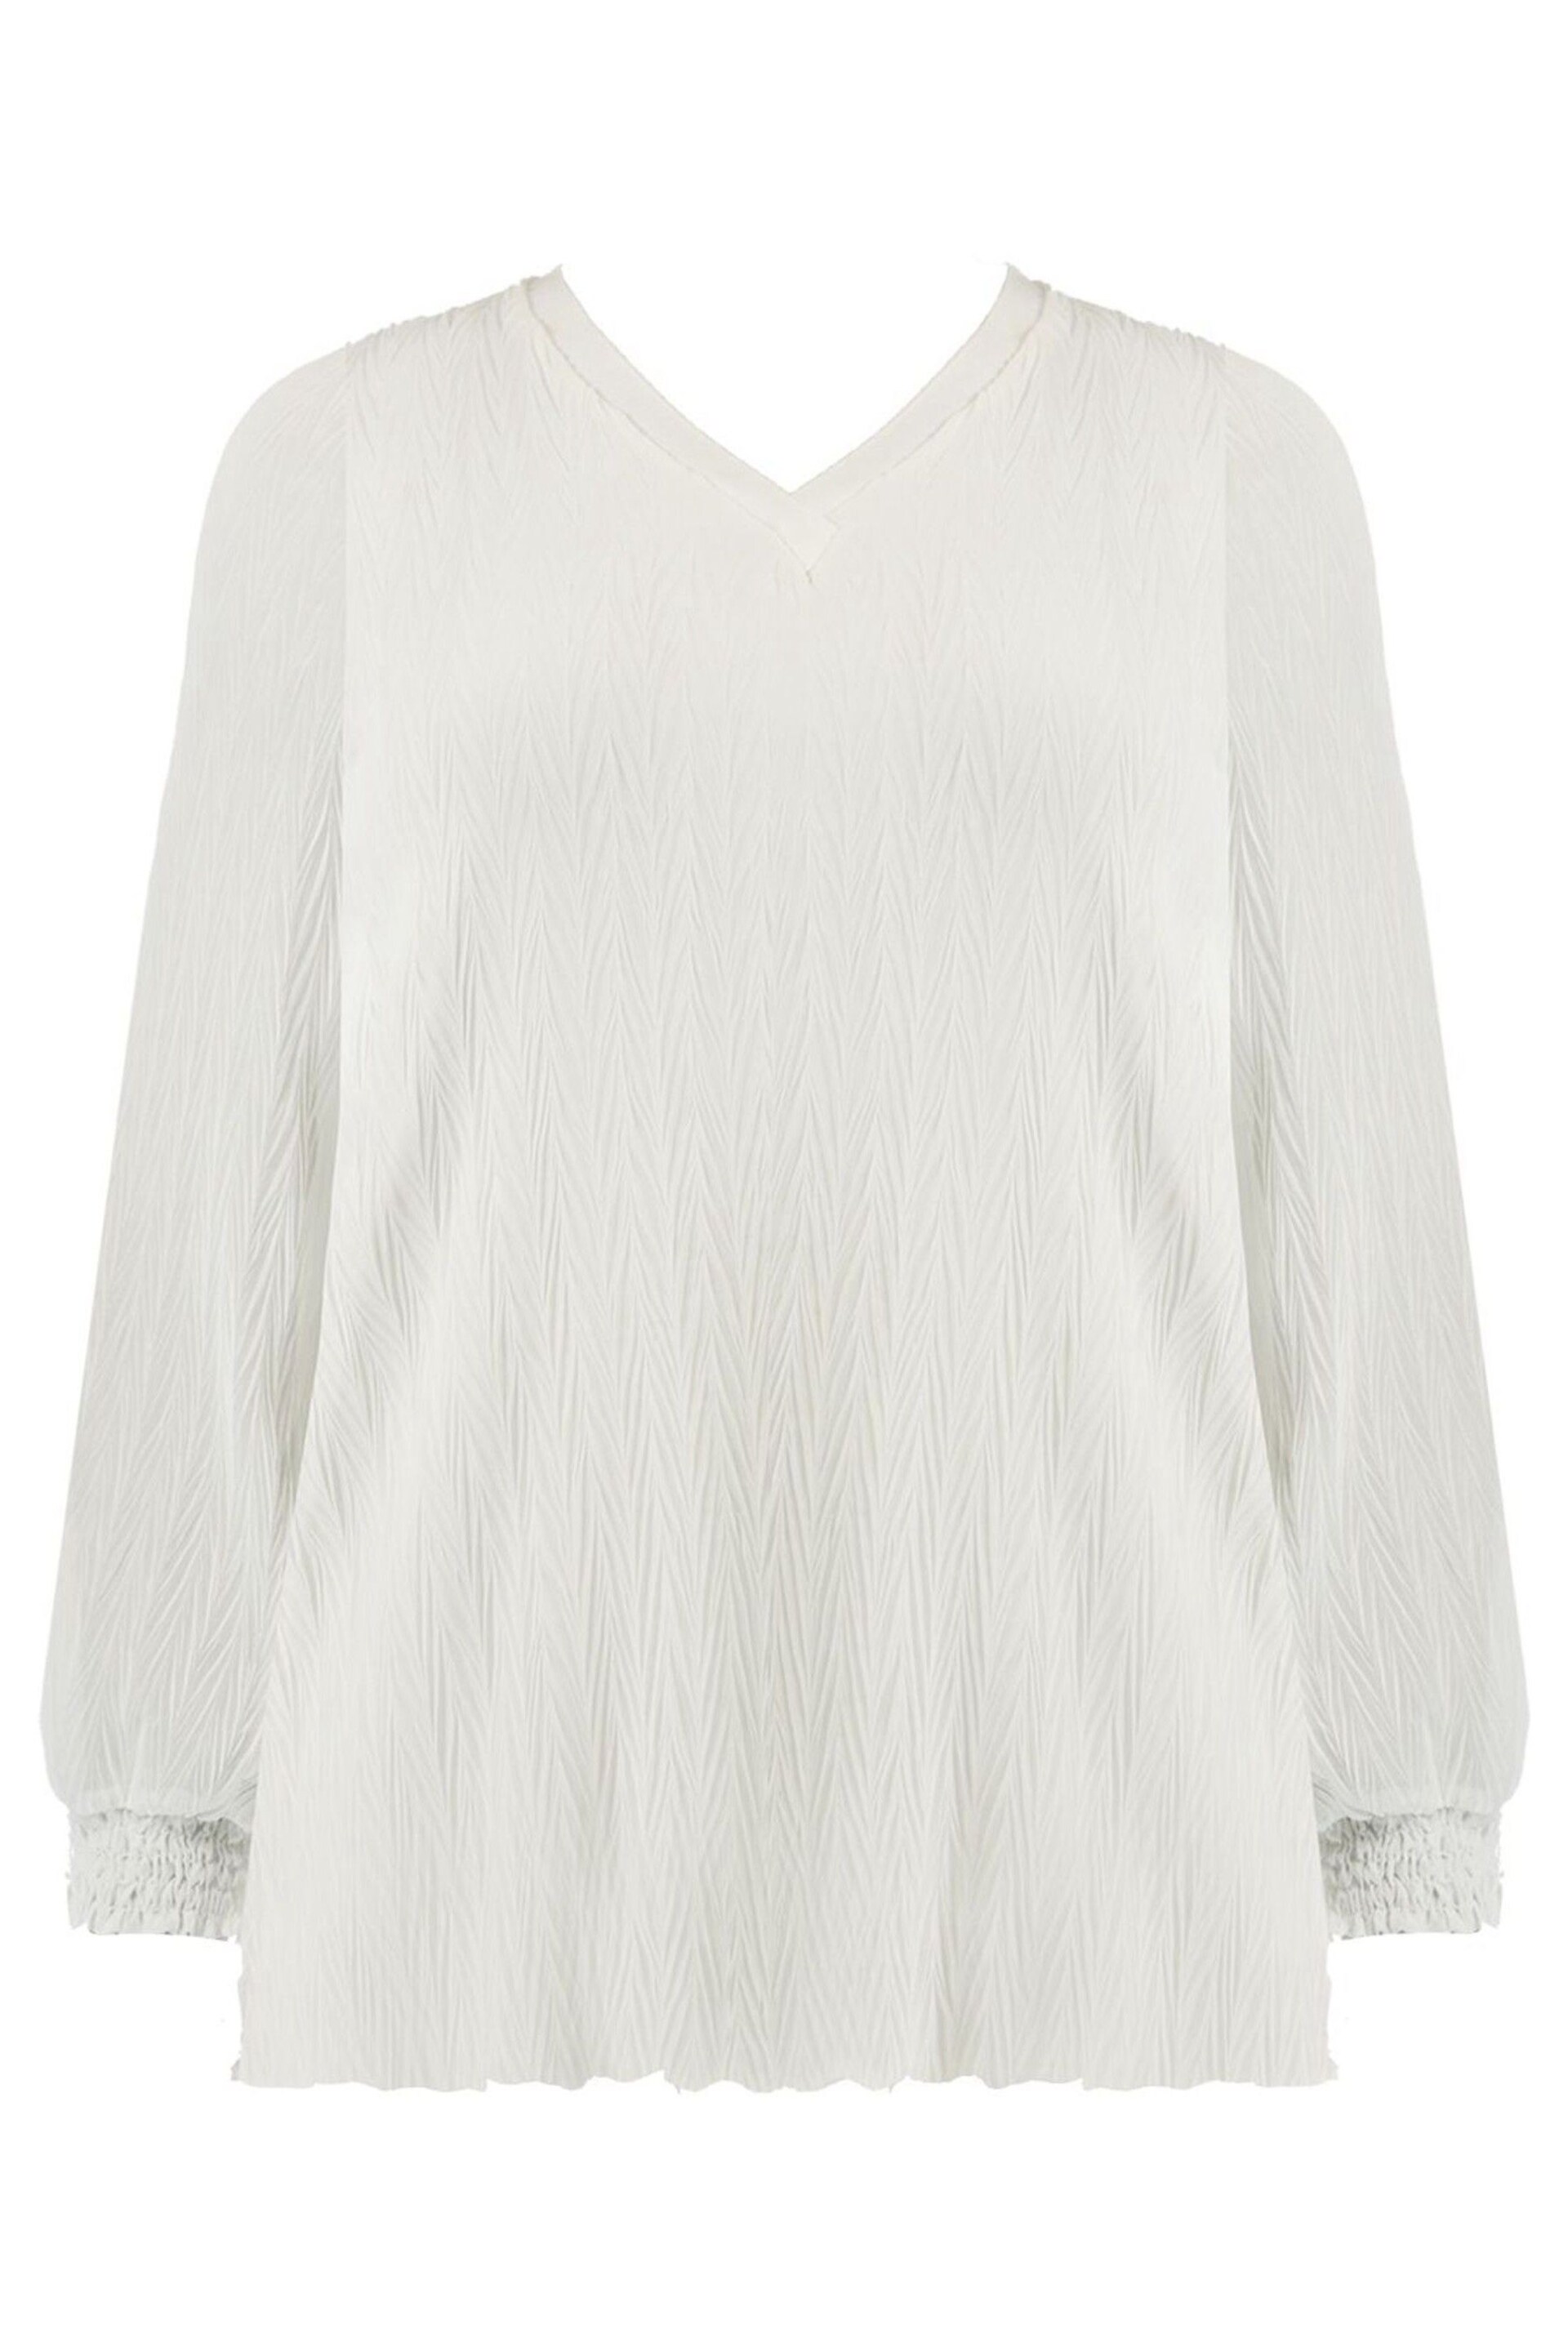 Live Unlimited White Textured Rib Trim Blouse - Image 5 of 5